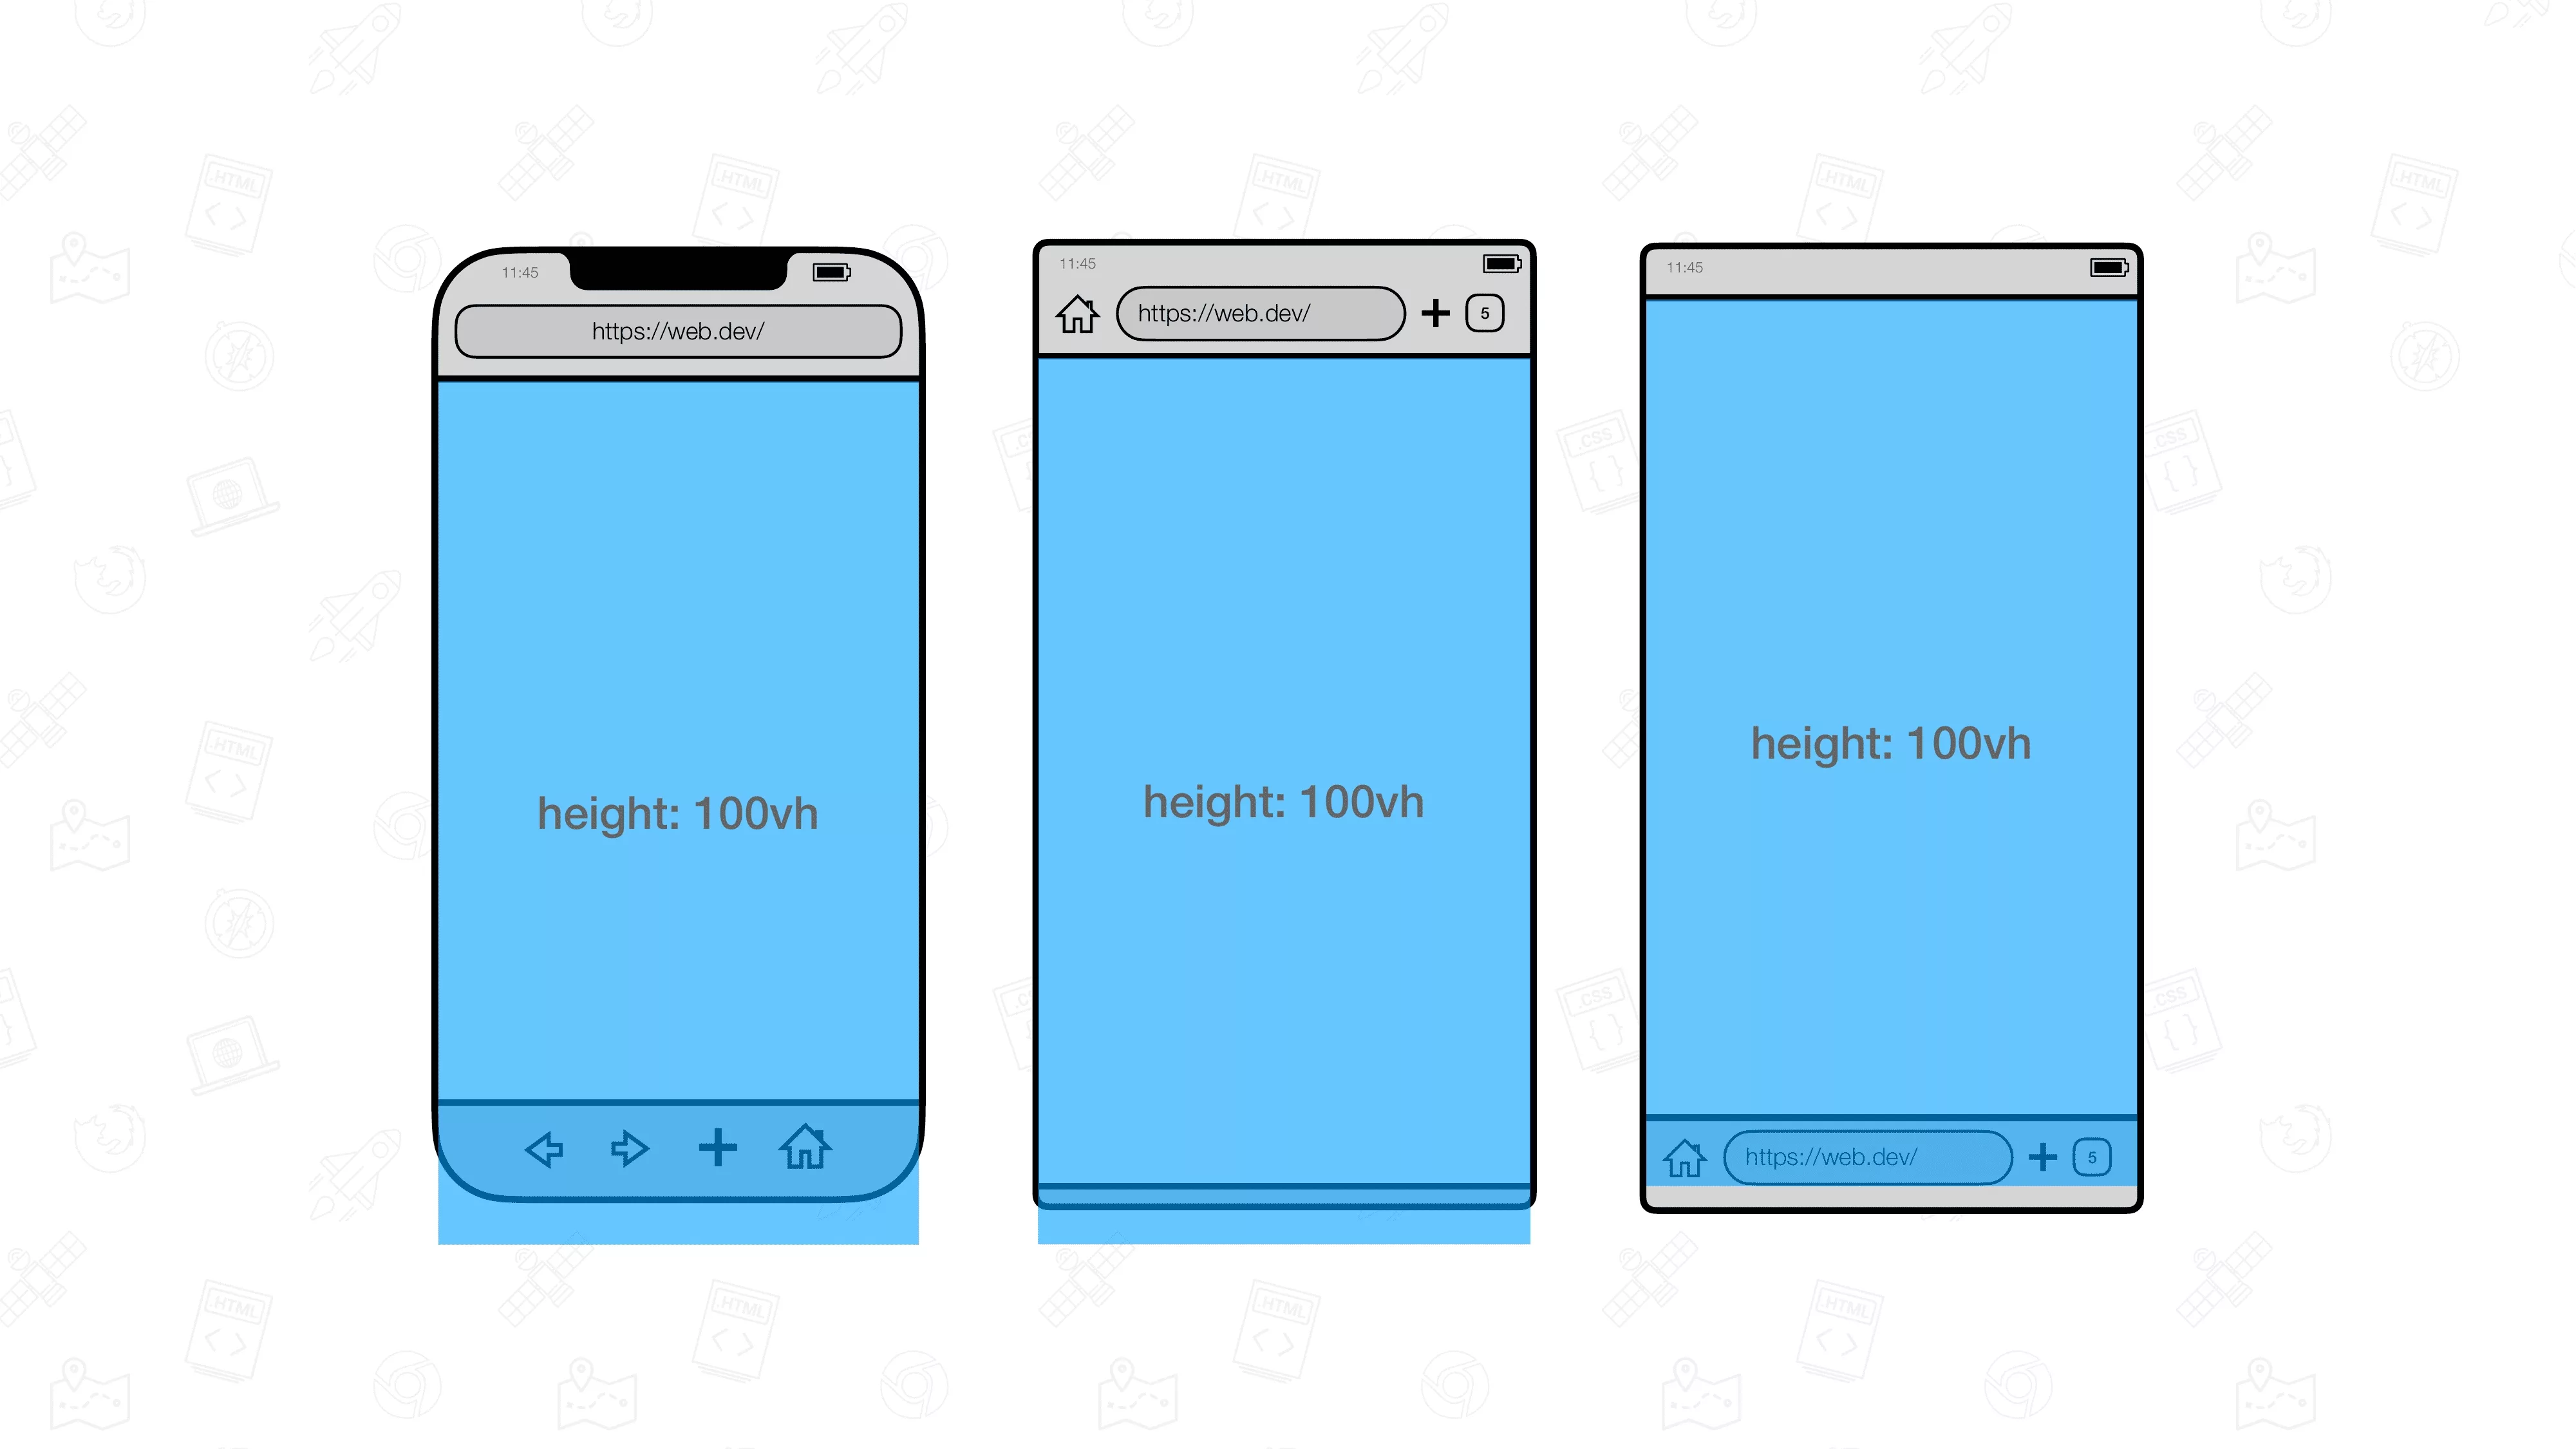 Web.dev's illustration of the viewport of a mobile phone web browser.